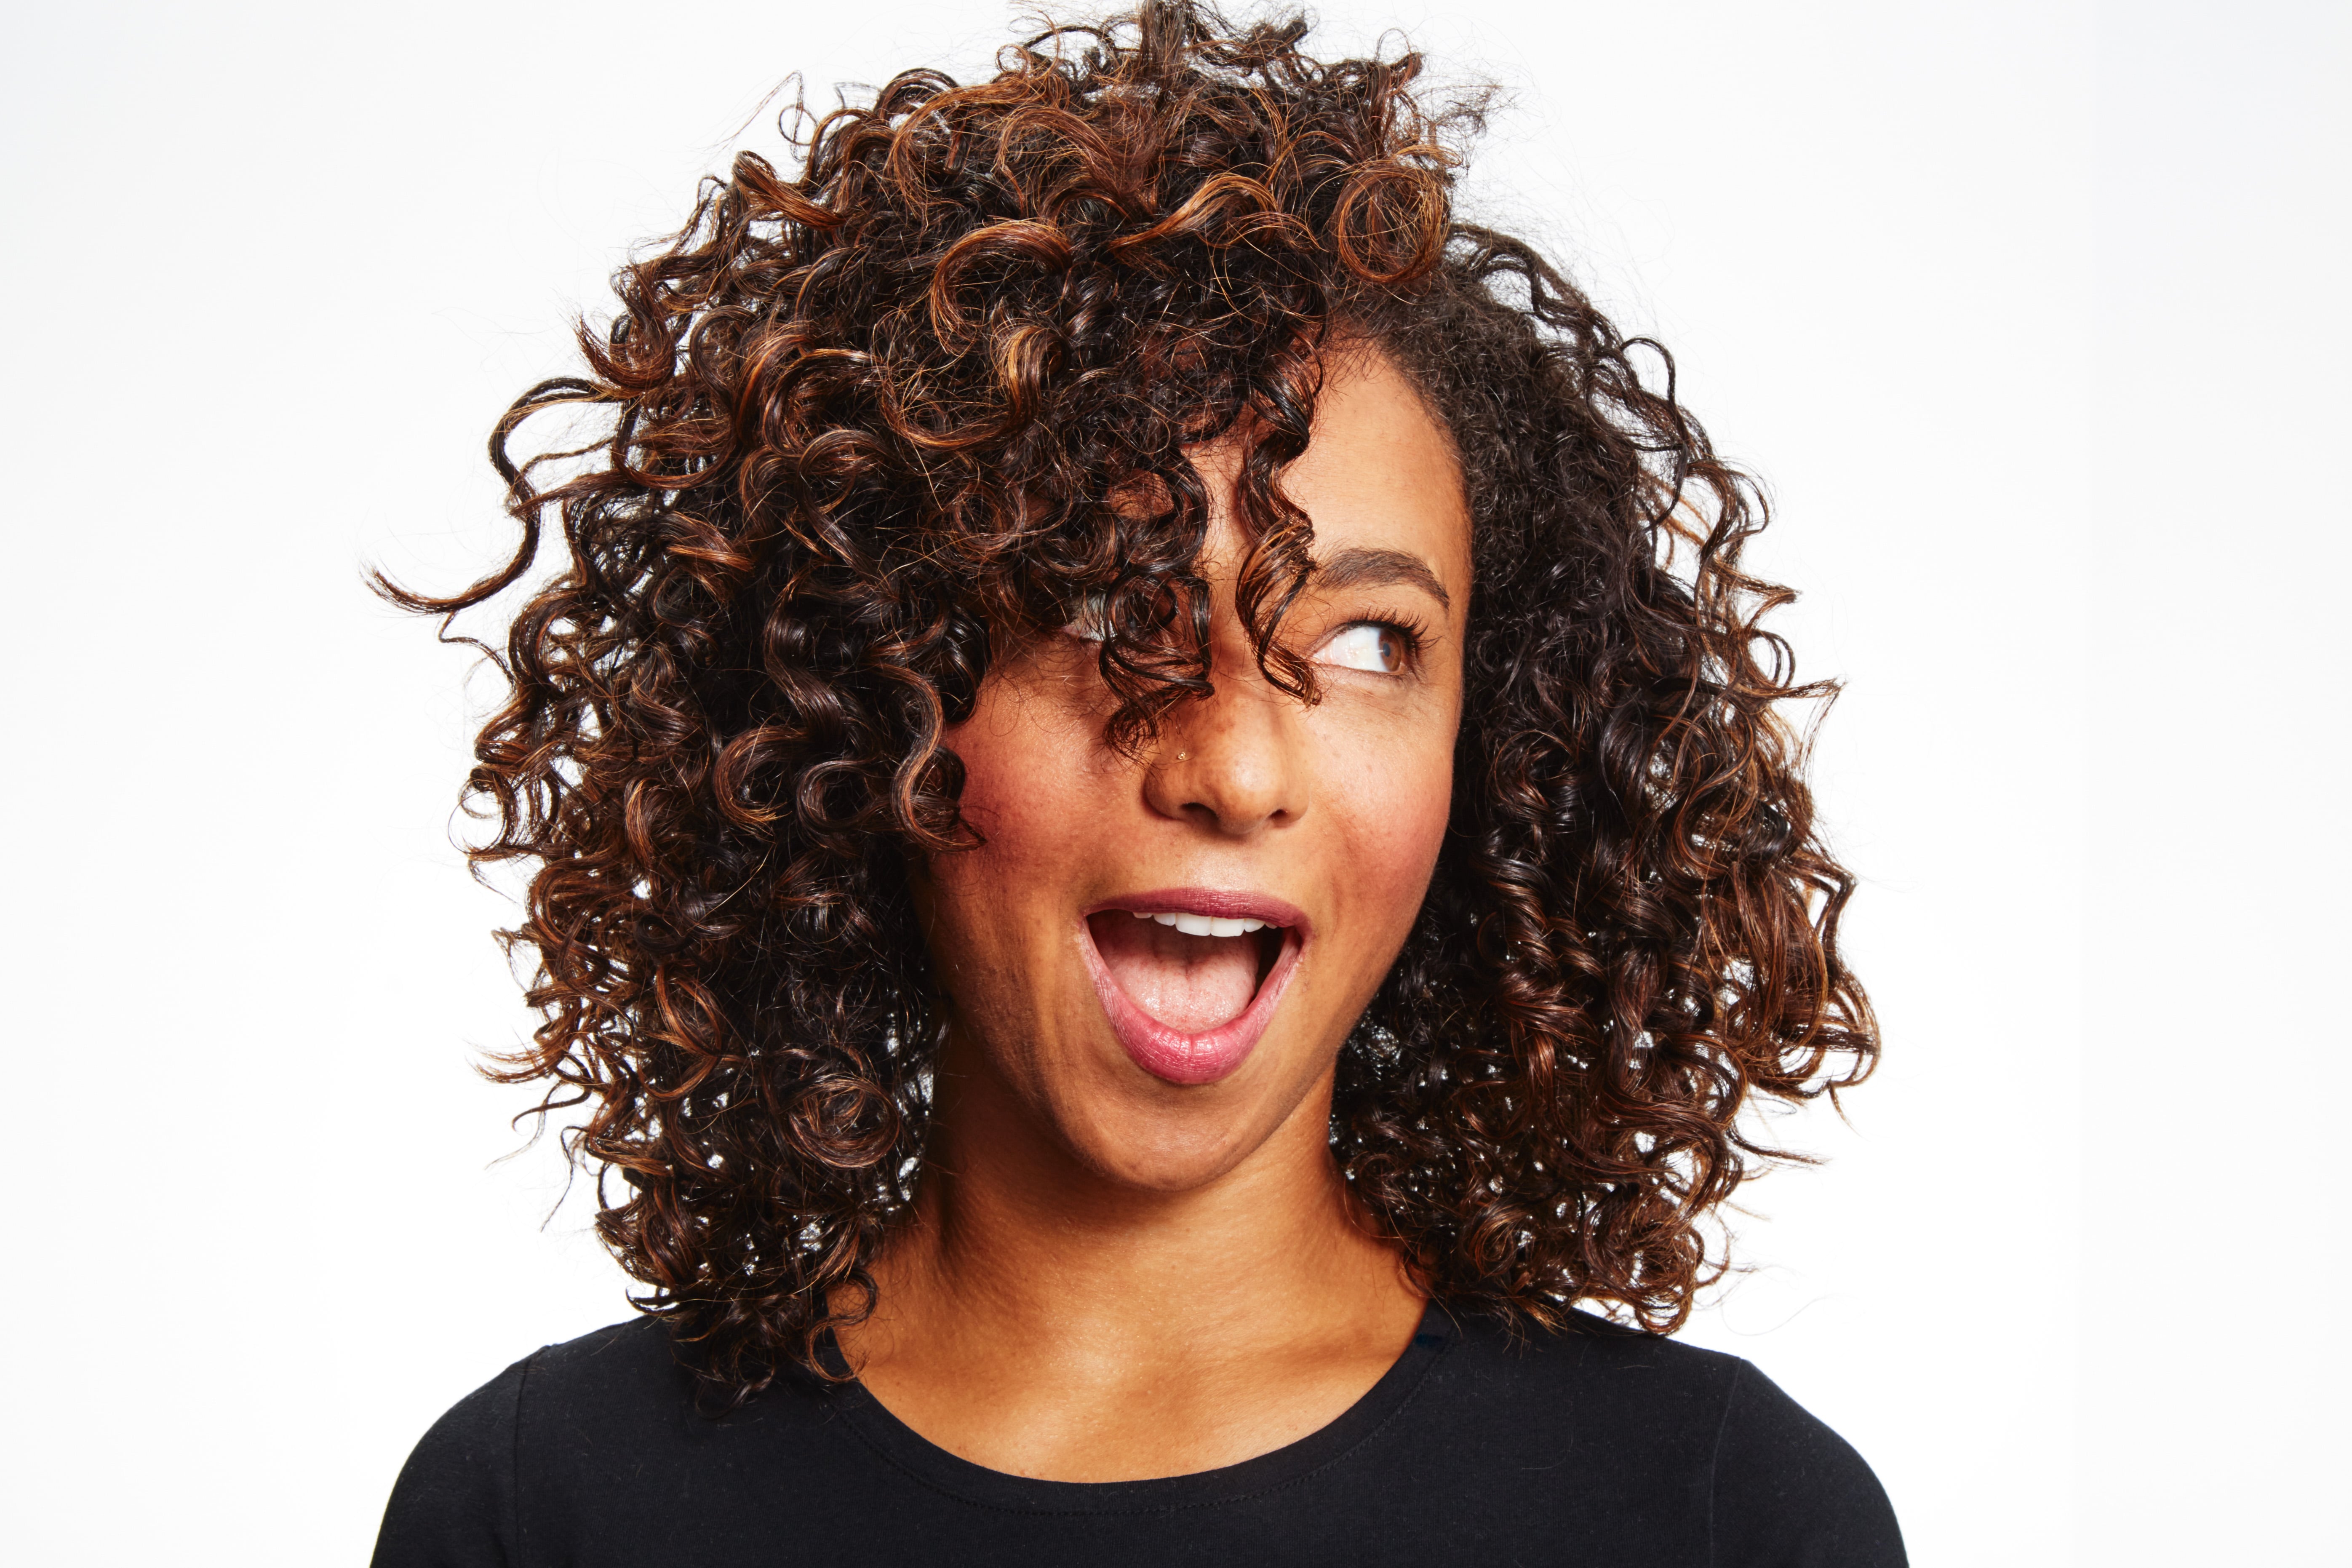 11 Best Curly Hair Products - Great Products & Tools to Style